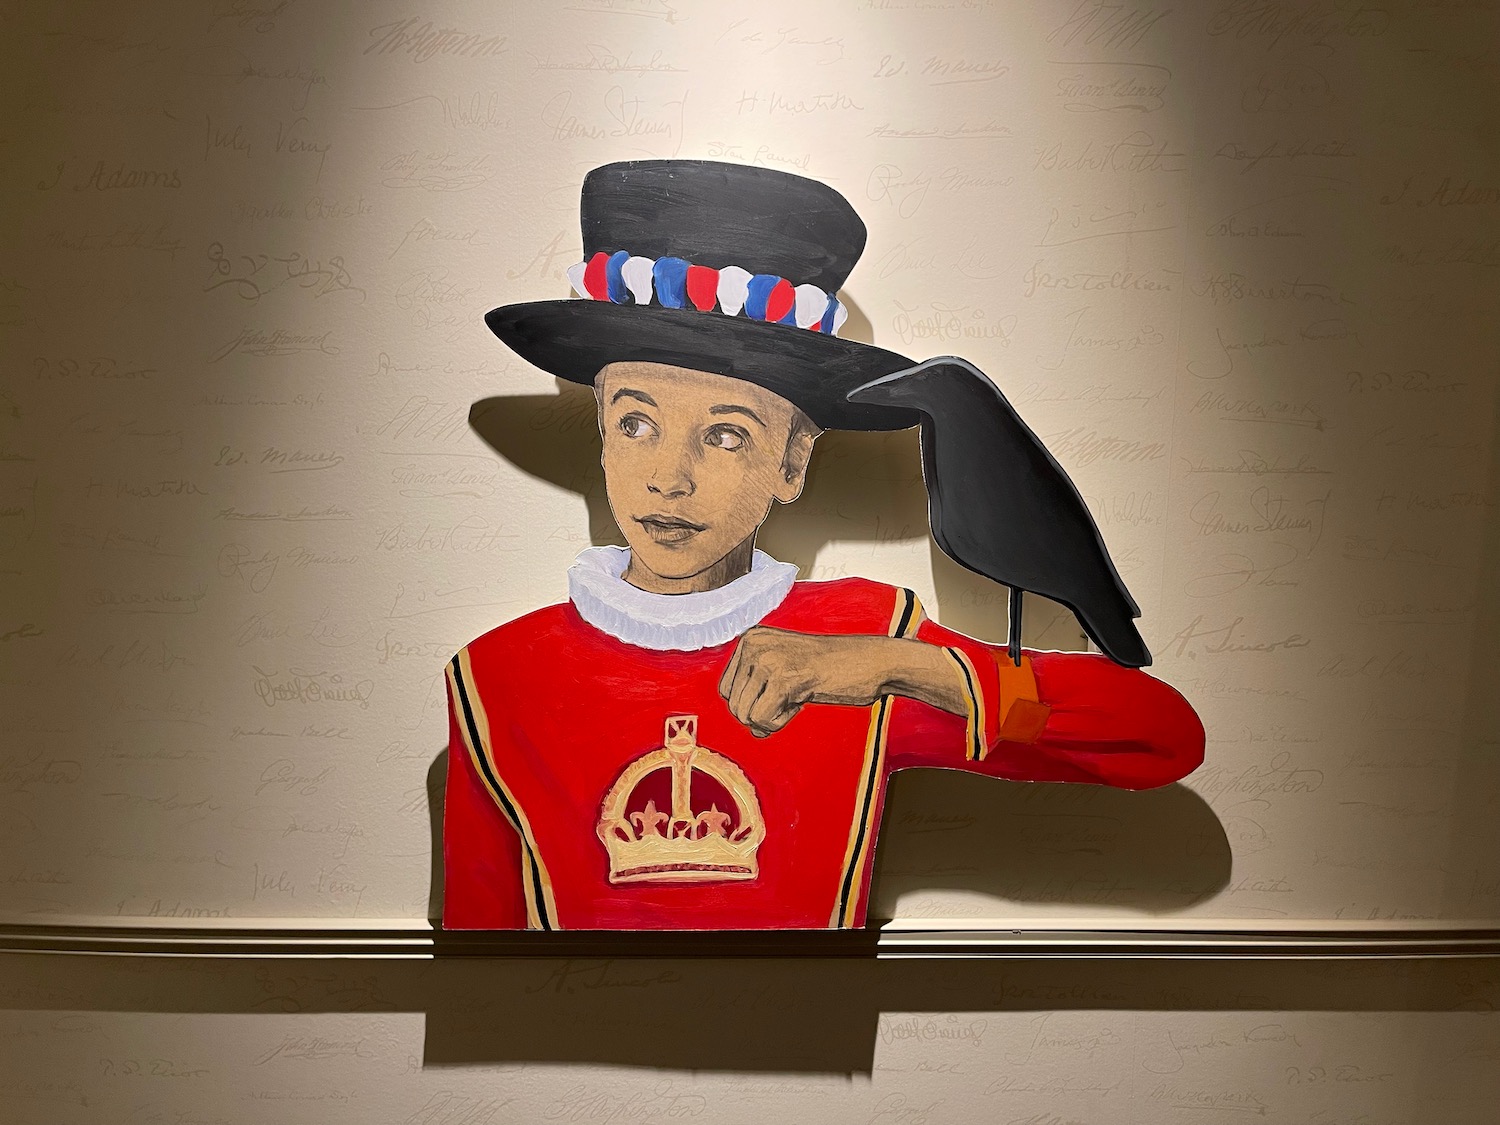 a painting of a boy in a red shirt and a black hat